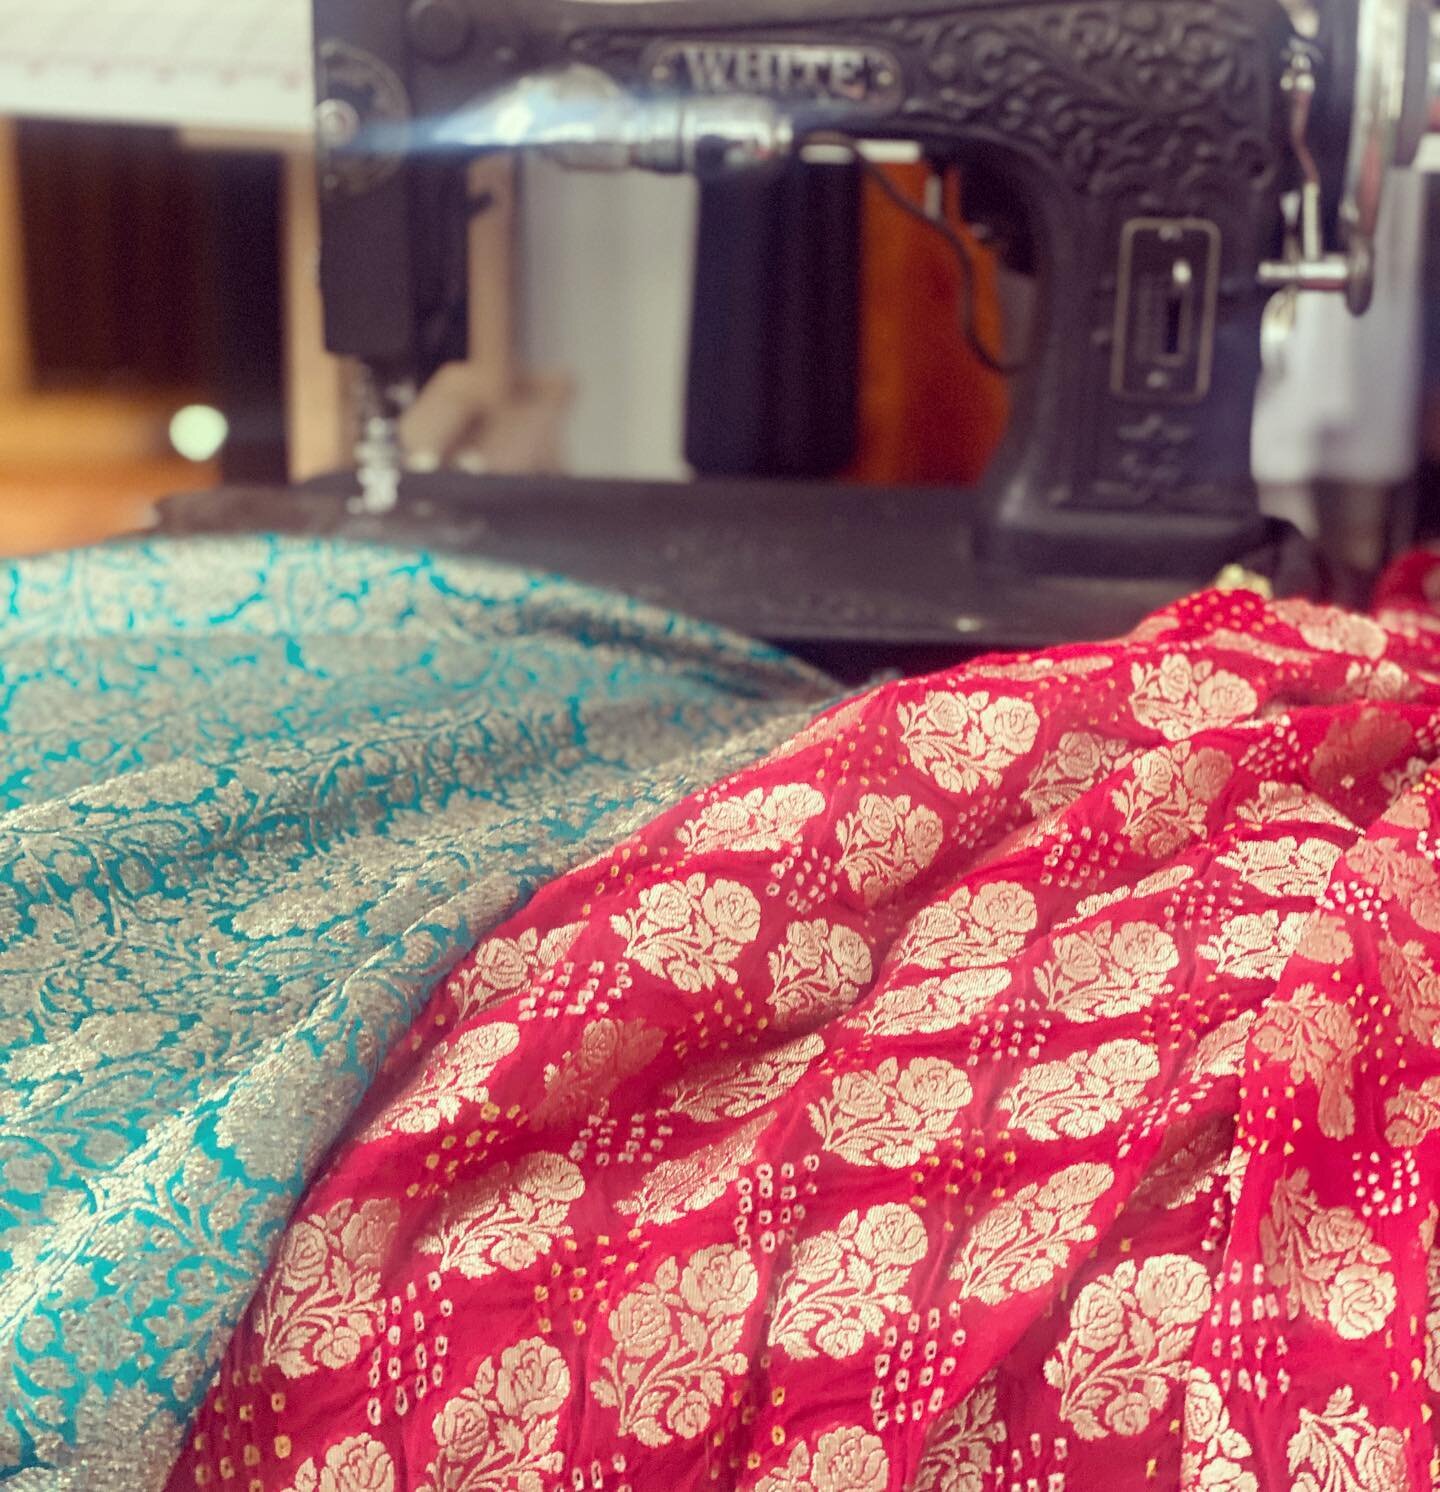 A sneak peak at some of the gorgeous brocade silks that I brought back from India. The only thing that will put me in a good mood on this gloomy Seattle day is admiring my fabric stash!!